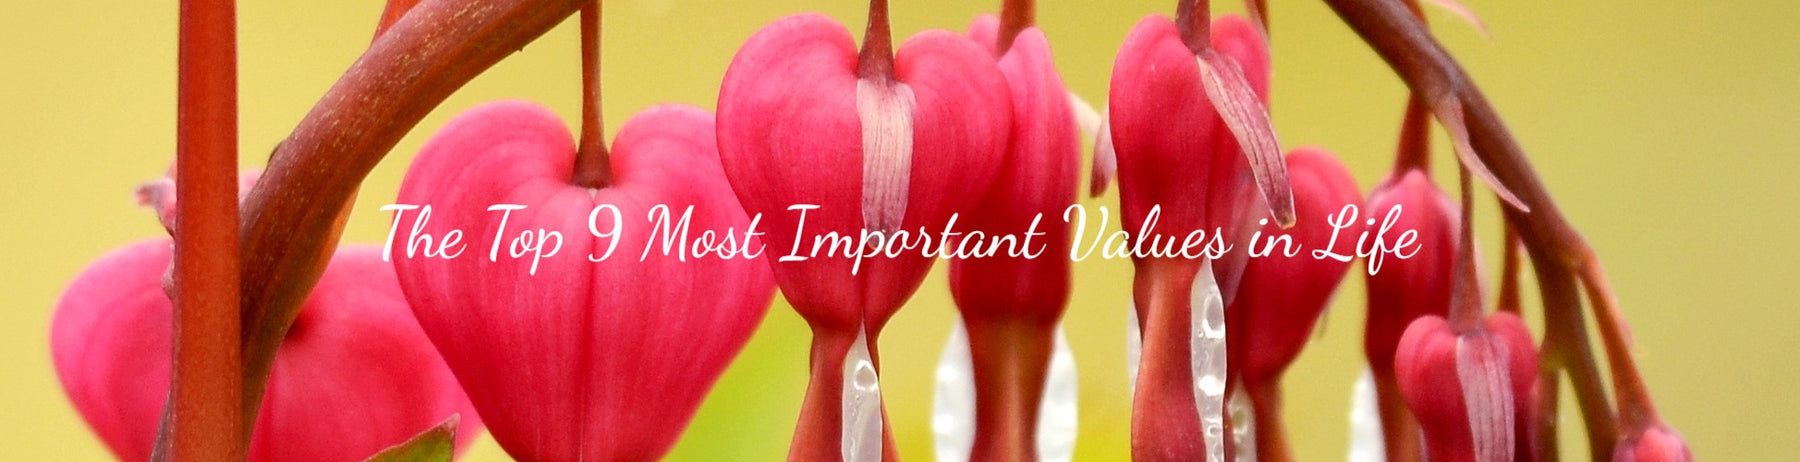 The Top 9 Most Important Values in Life